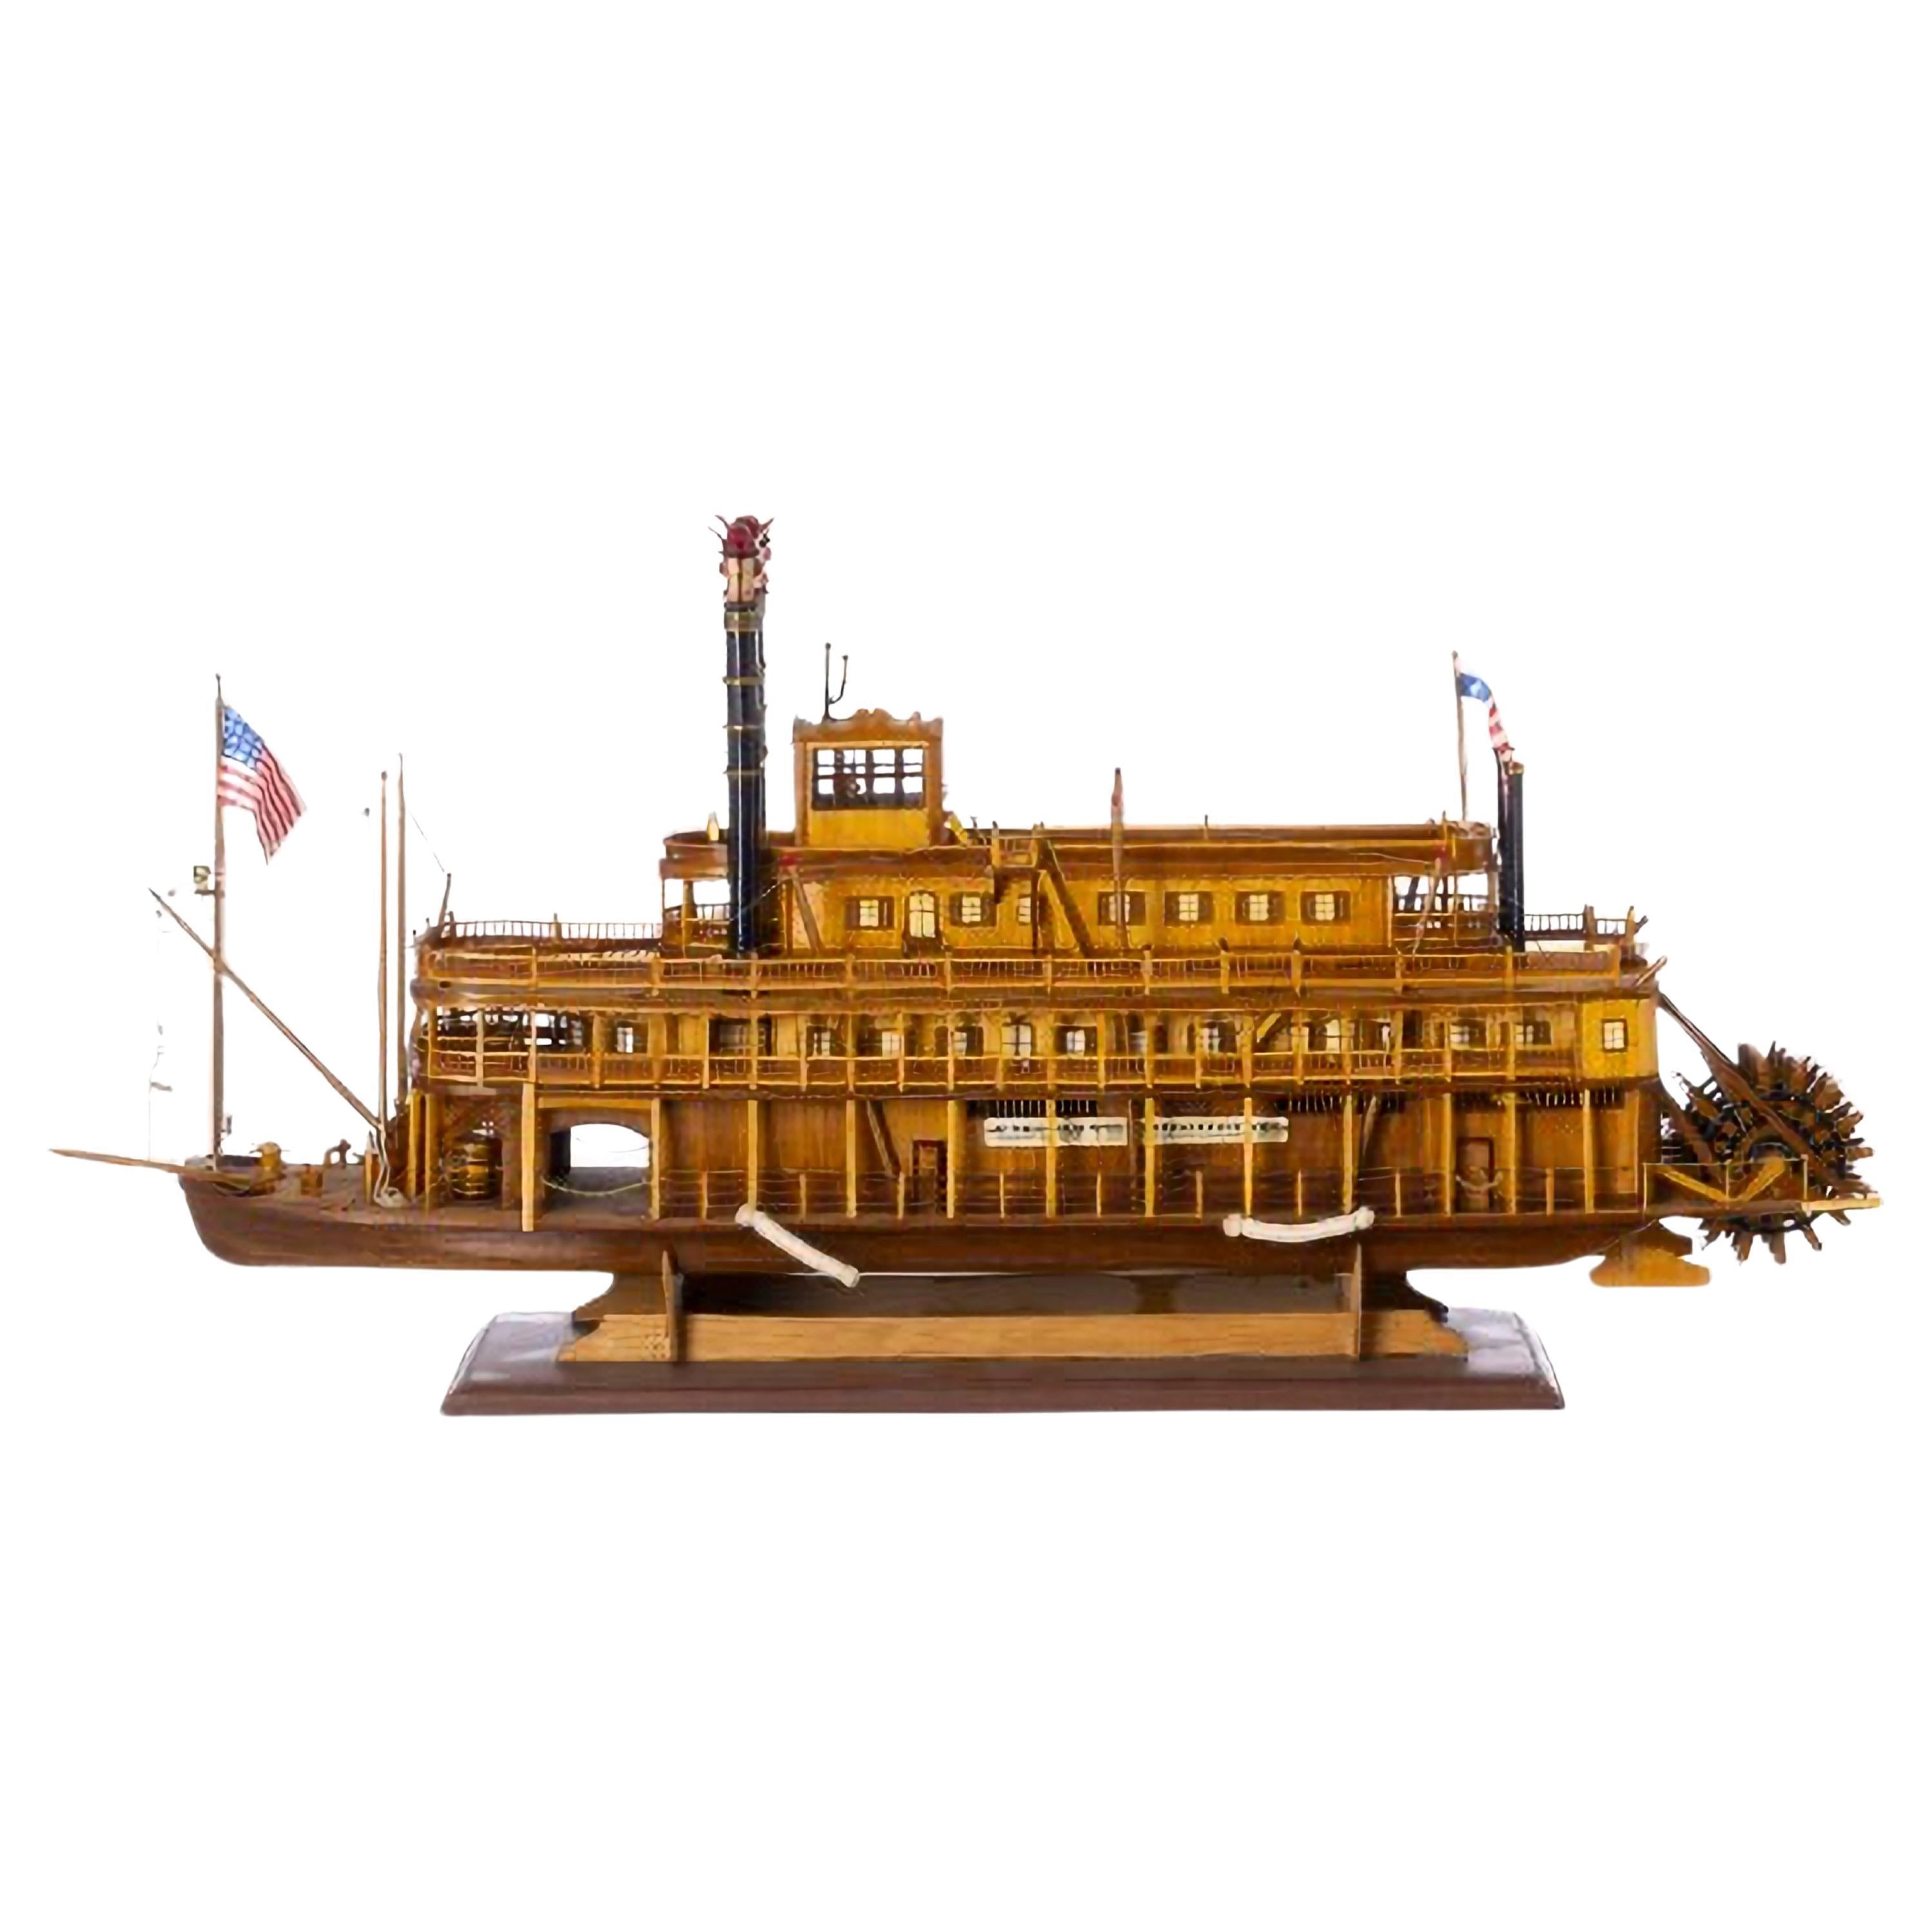 STEAM SHIP MODEL "KING OF THE MISSISSIPPI" 20th Century For Sale